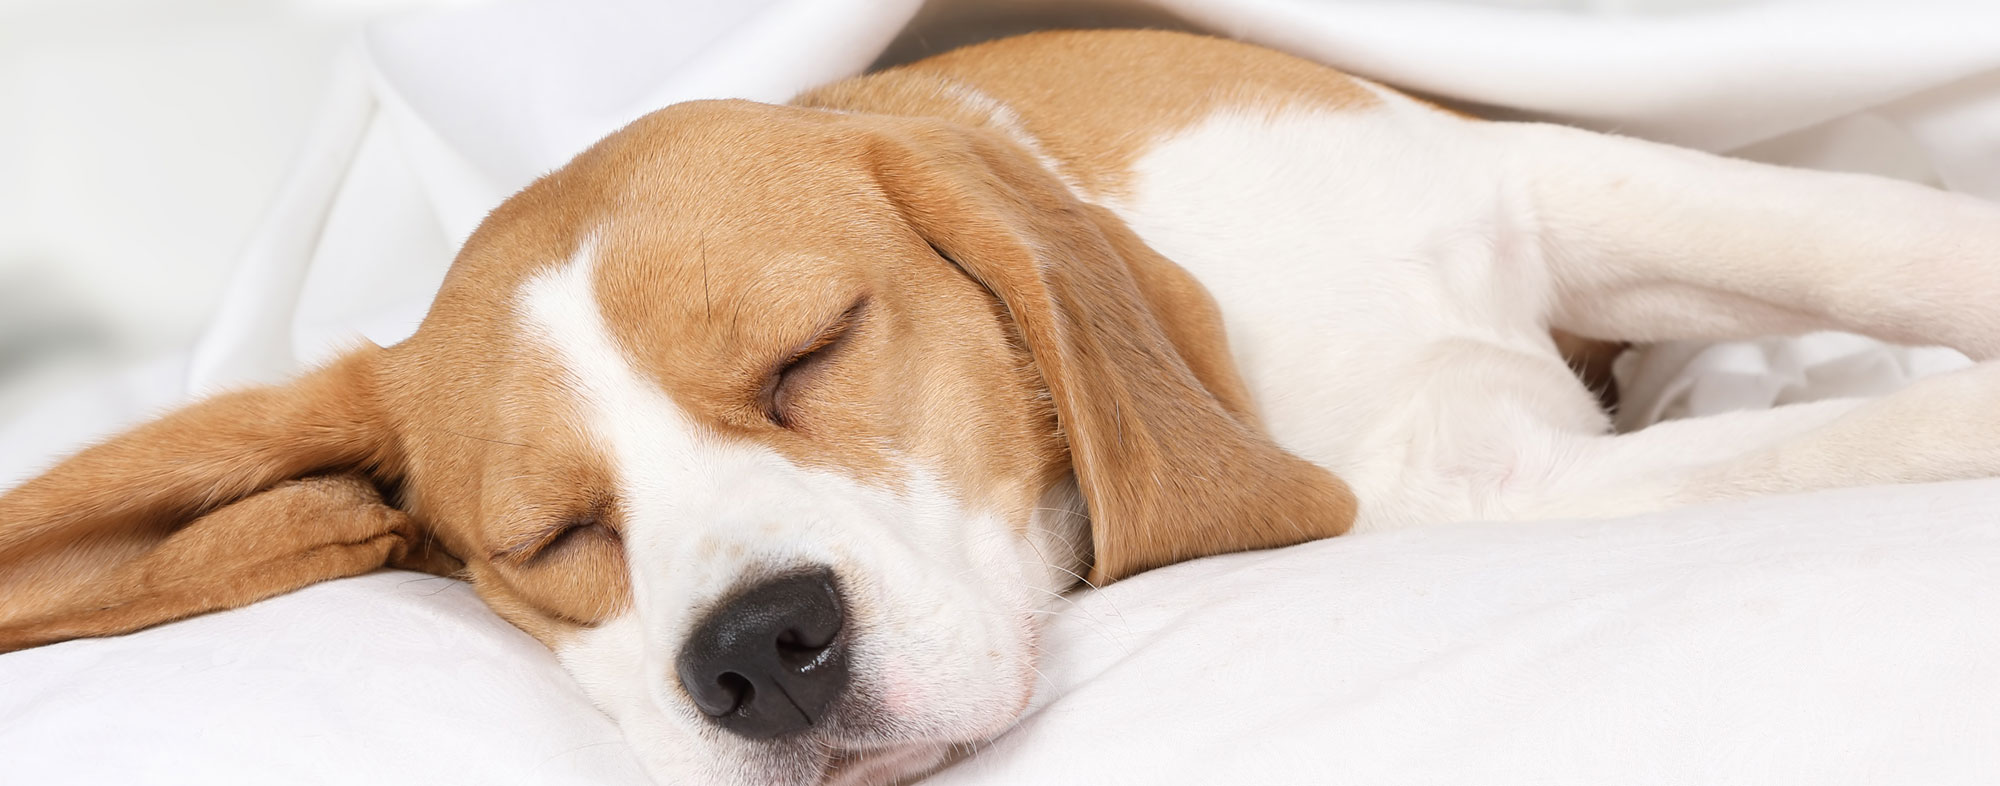 Is your dog sleeping too much? | Hartz